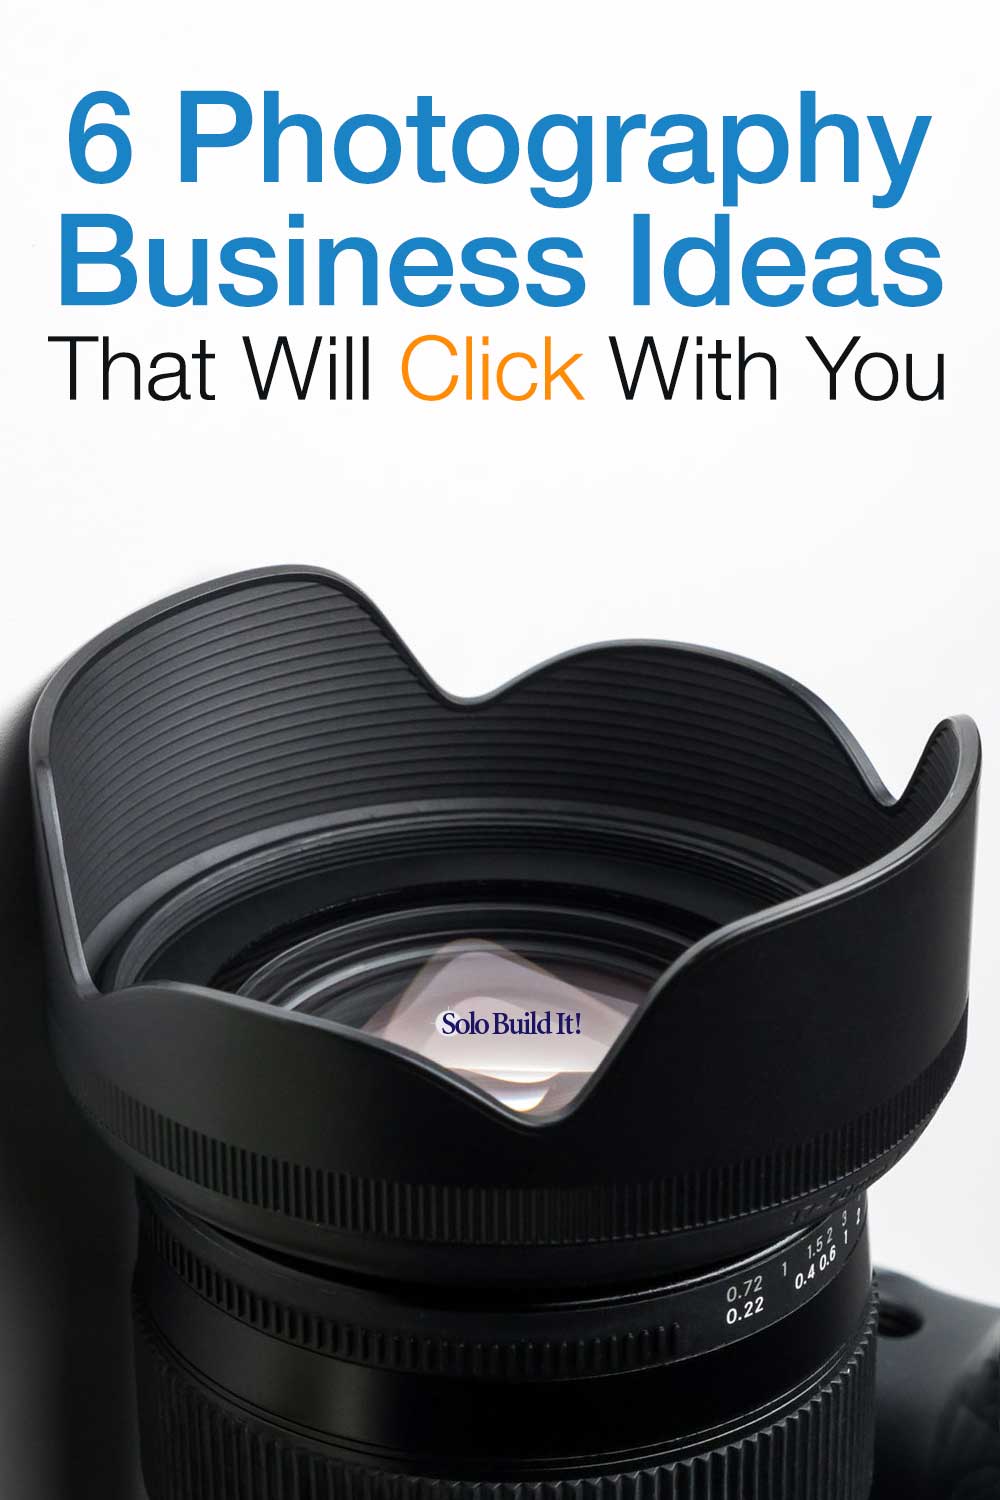 Six Photography Business Ideas That Will Click With You